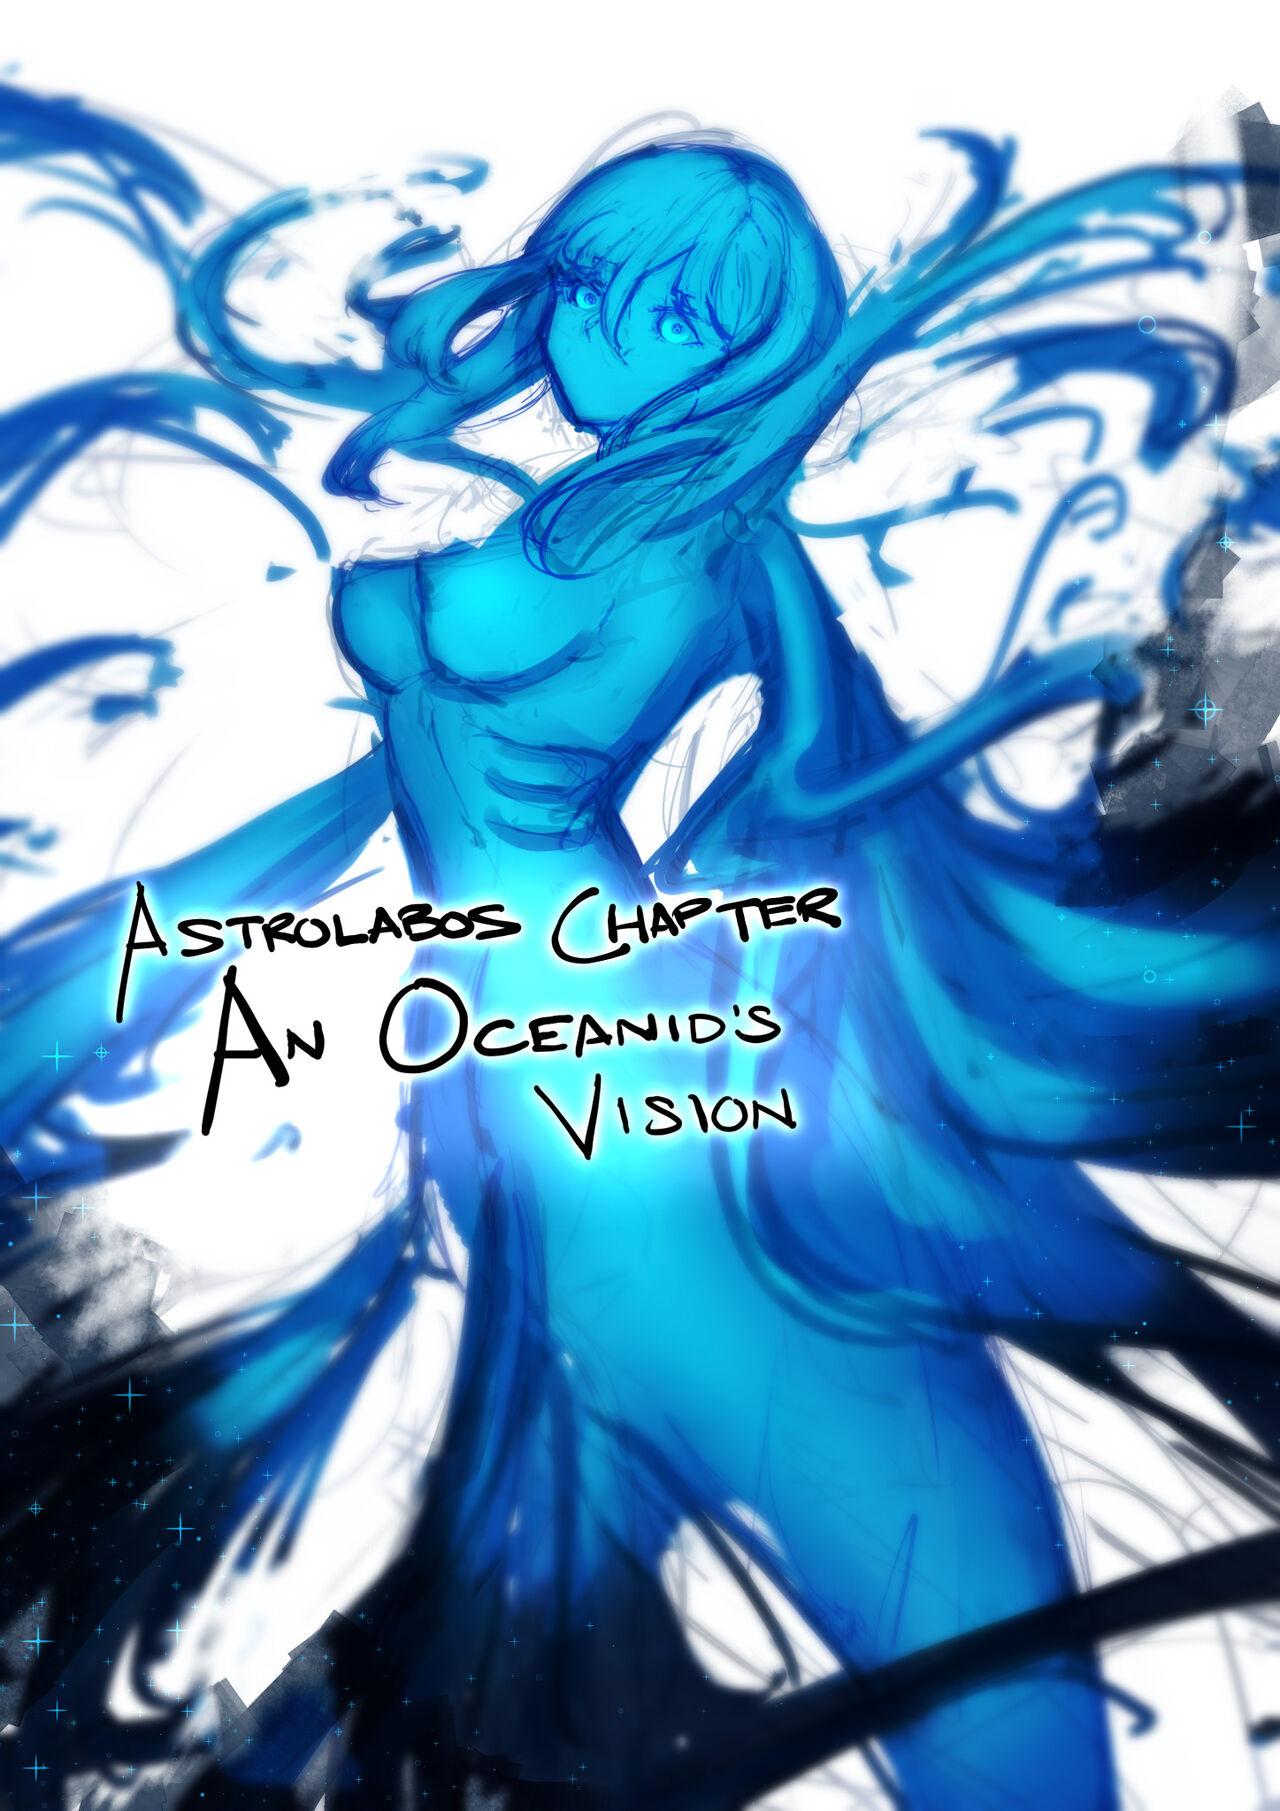 Mmf Astrolabos chapter- side act: An Oceanid’s vision Hair - Picture 1